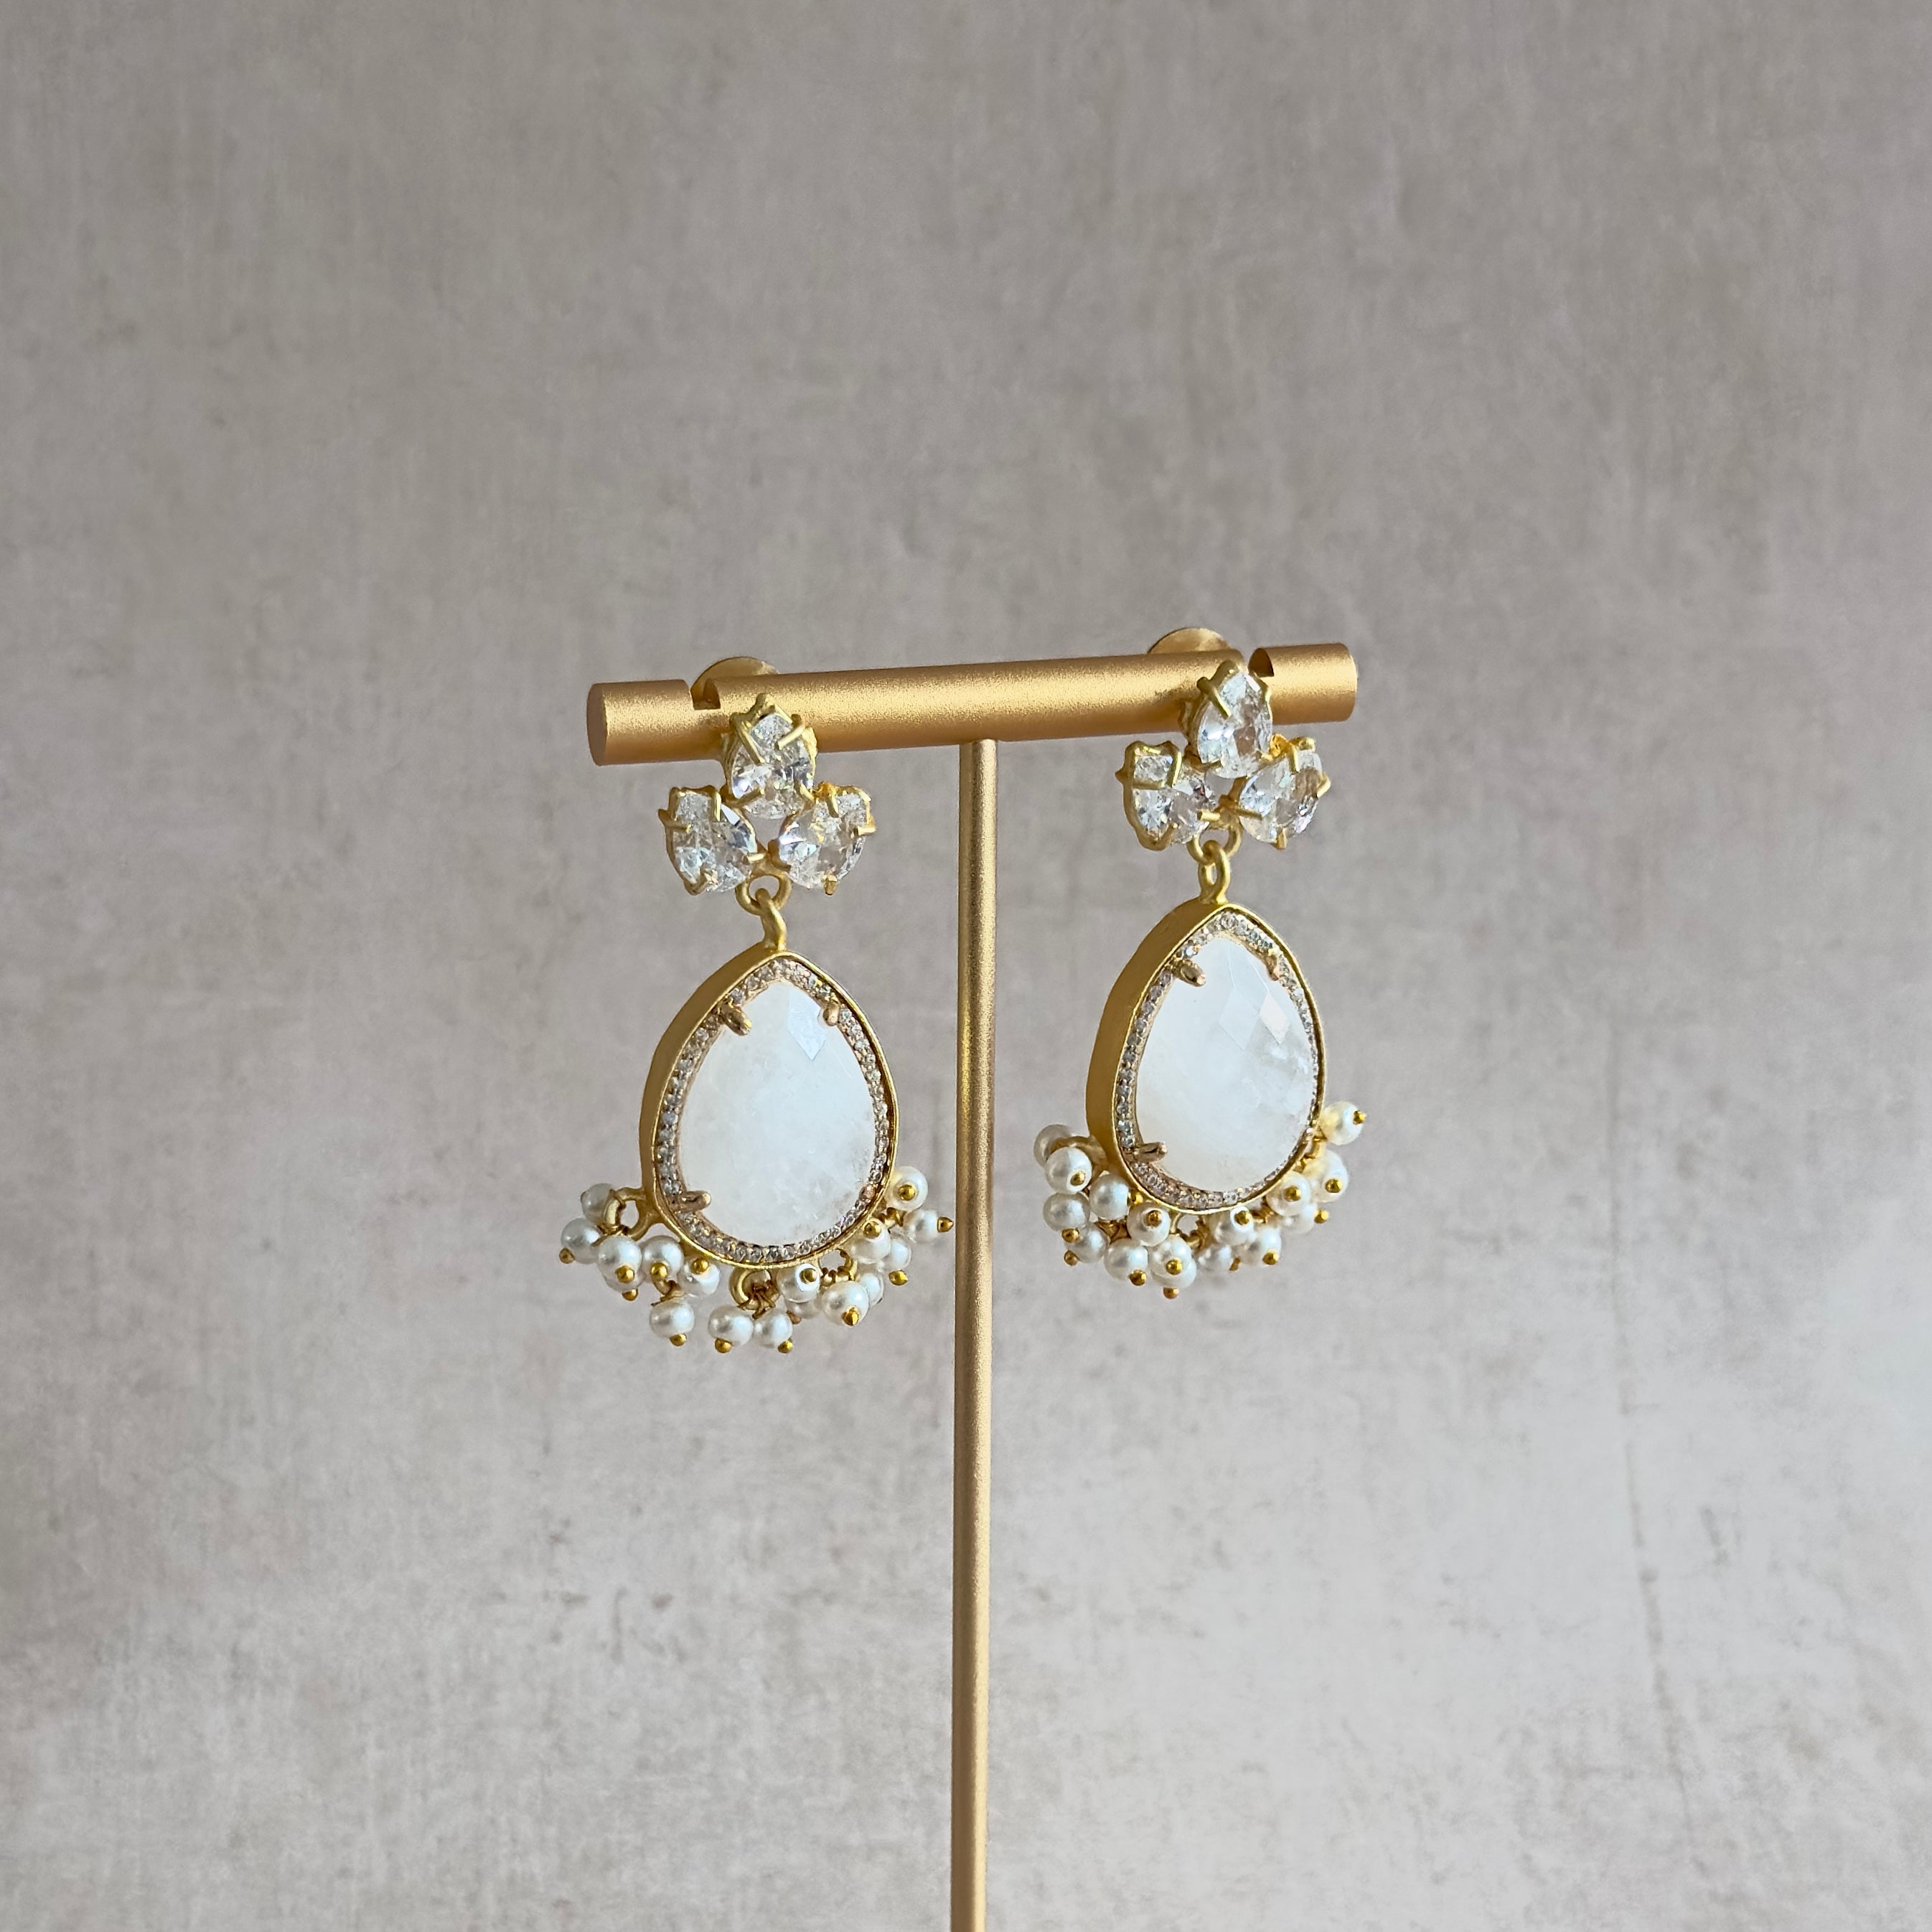 Enhance your elegance with Emilia White Crystal Drop Earrings. Featuring stunning white quartz crystals, these earrings will add a touch of sparkle to any outfit. Upgrade your style with the natural beauty of these handcrafted earrings. Elevate your look, and make a statement.